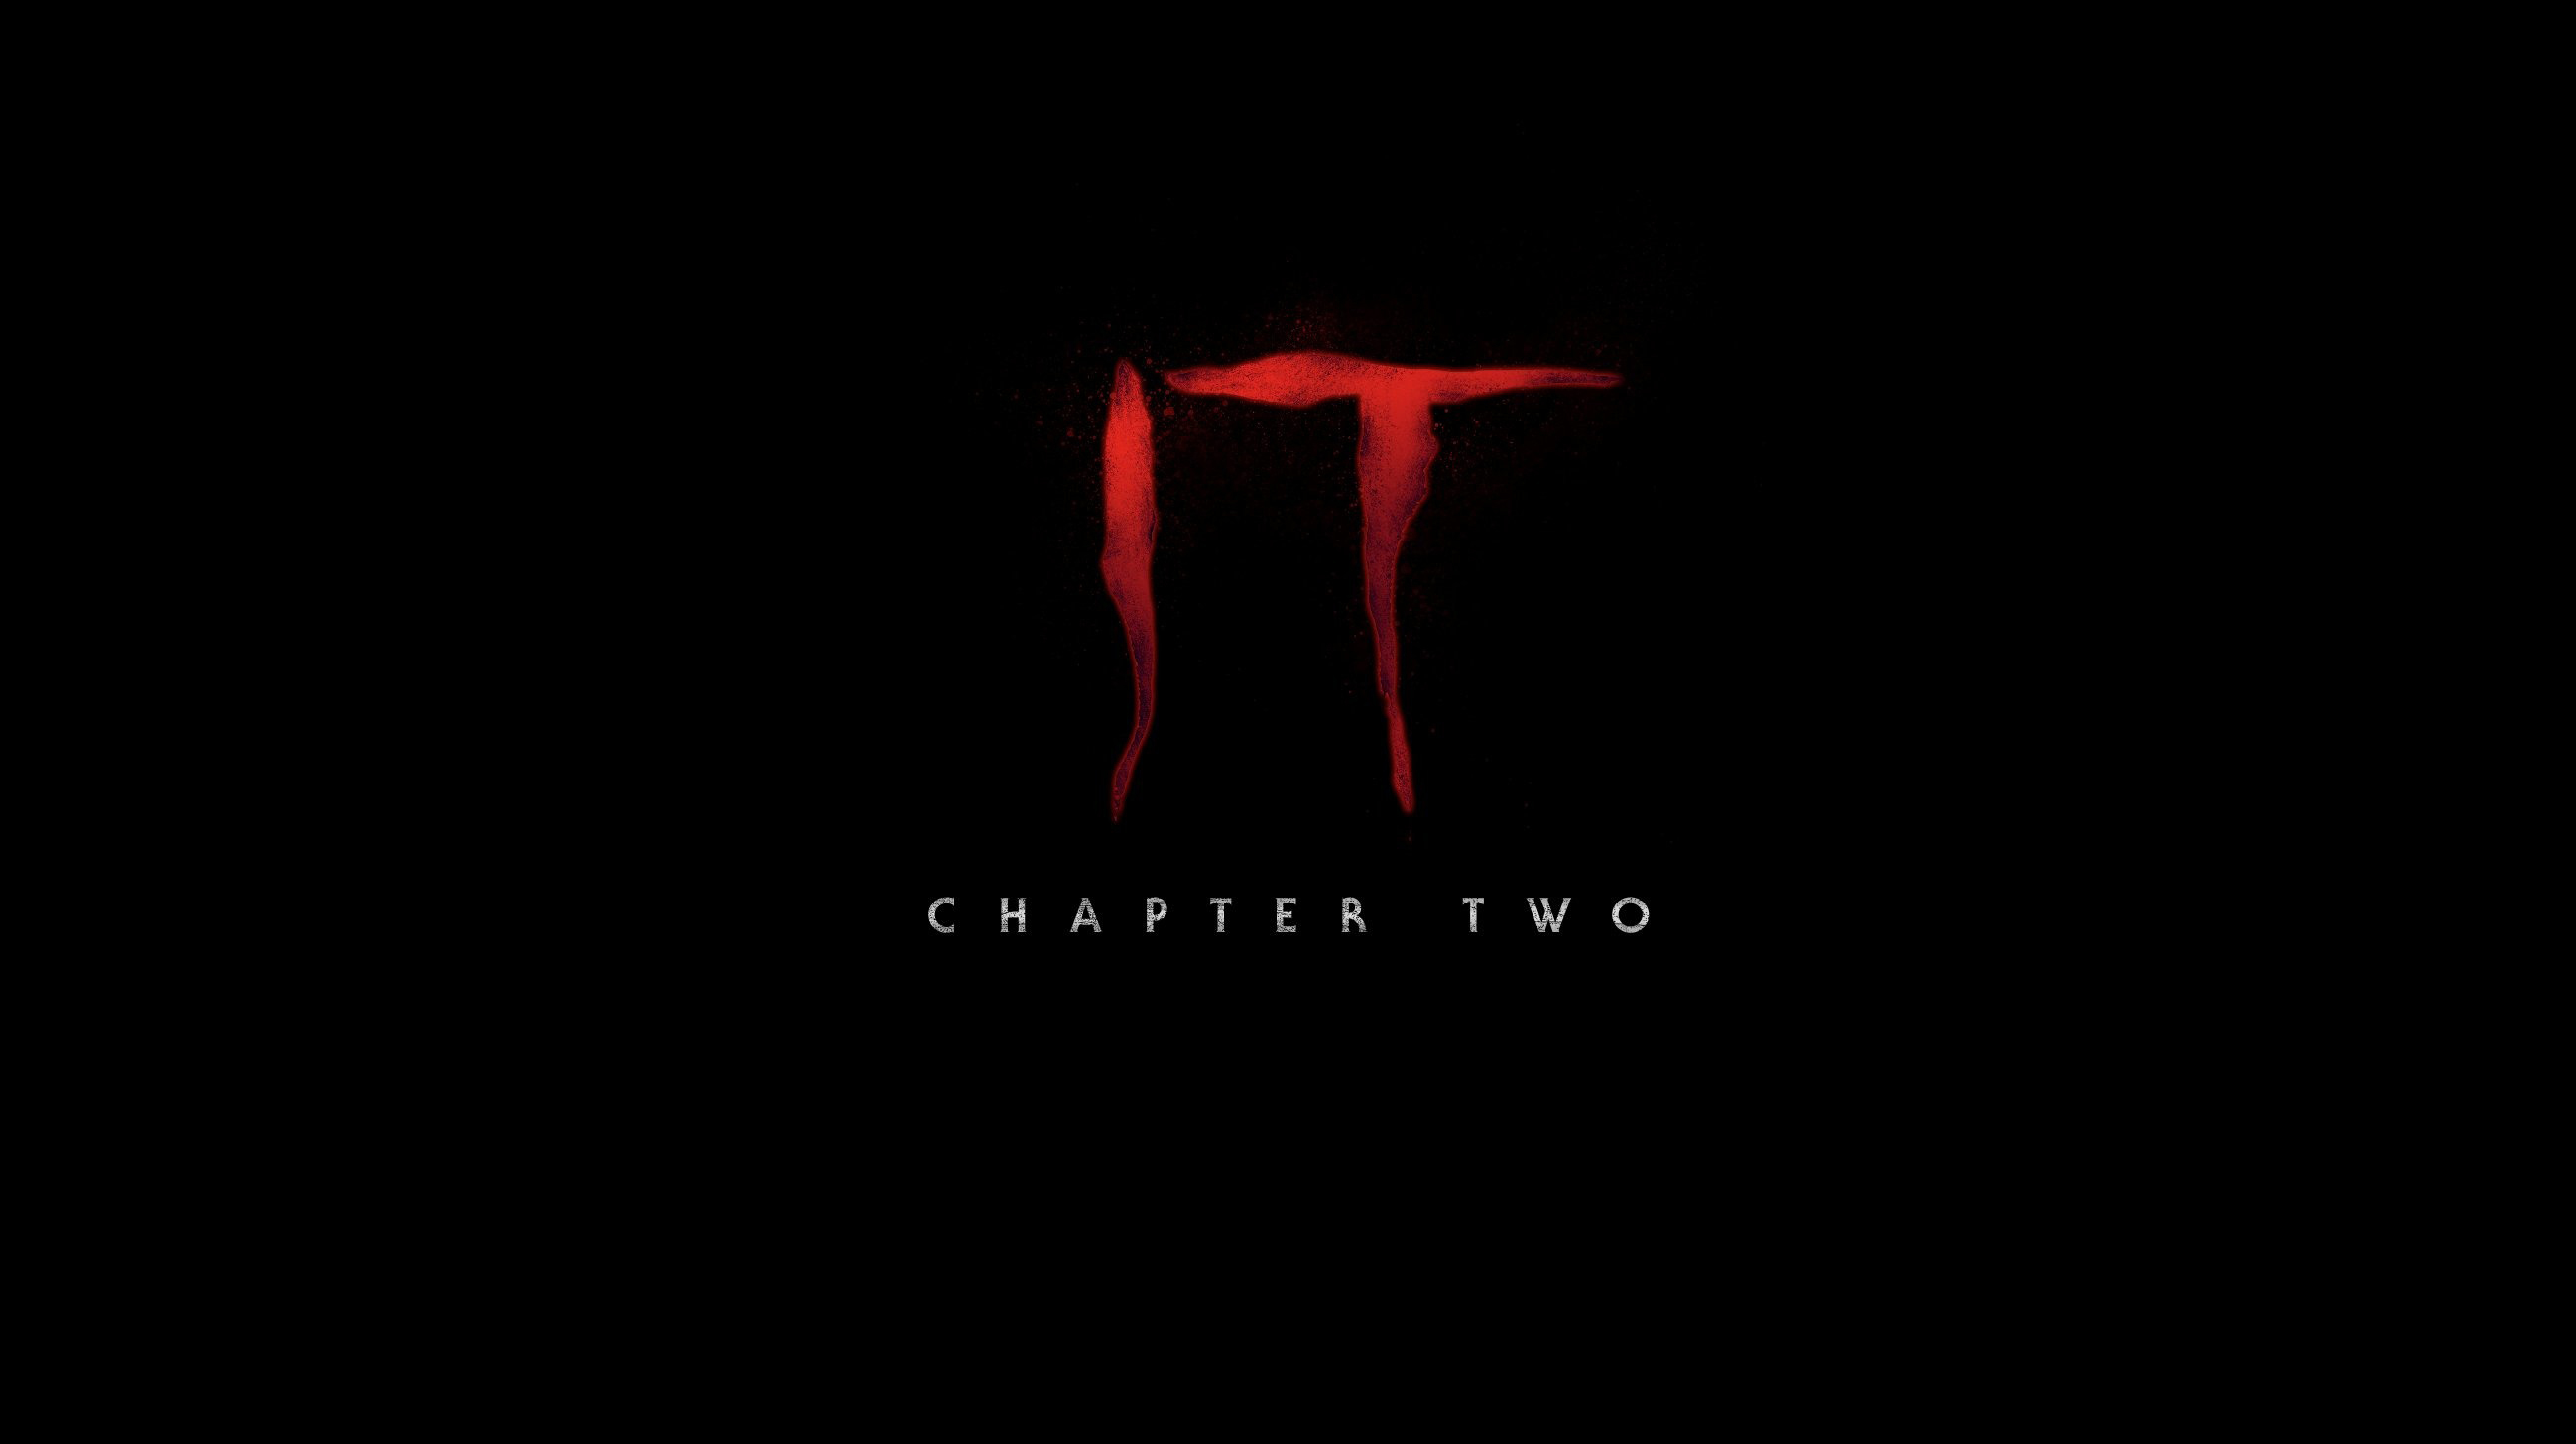 It Chapter Two 2019 Movie Poster Wallpaper Hd Movies 4k Wallpapers Images Photos And Background Wallpapers Den